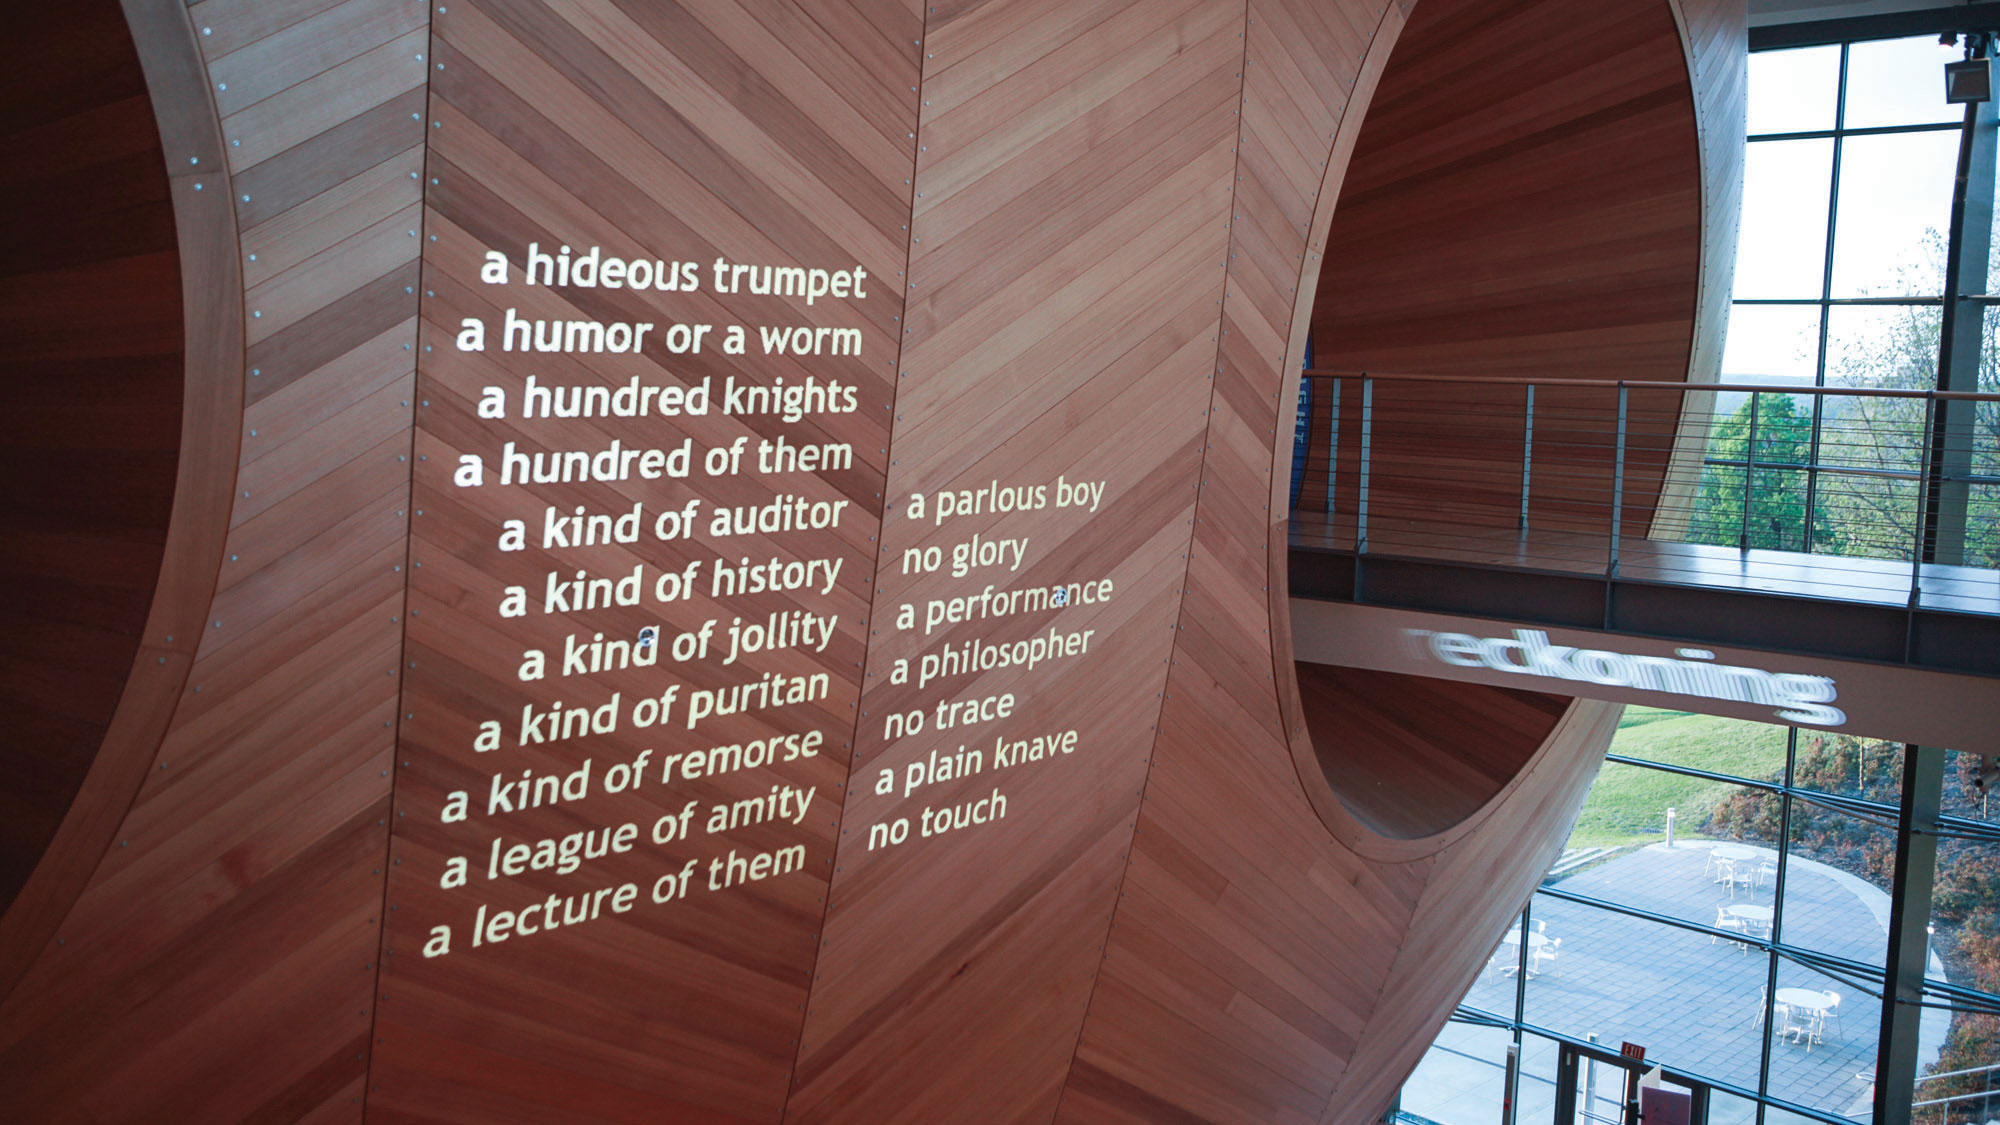 White text projected on to the wood hull of the concert hall that read "a hideous trumpet, a humor or a worm, a hundred of them, a kind of auditor, a kind of history, a kind of jollity, a kind of Puritan, a kind of remorse, a league of amity, a lecture of them, a parlous boy, no glory, a performance, a philosopher, no trace, a plain knave, no touch" 